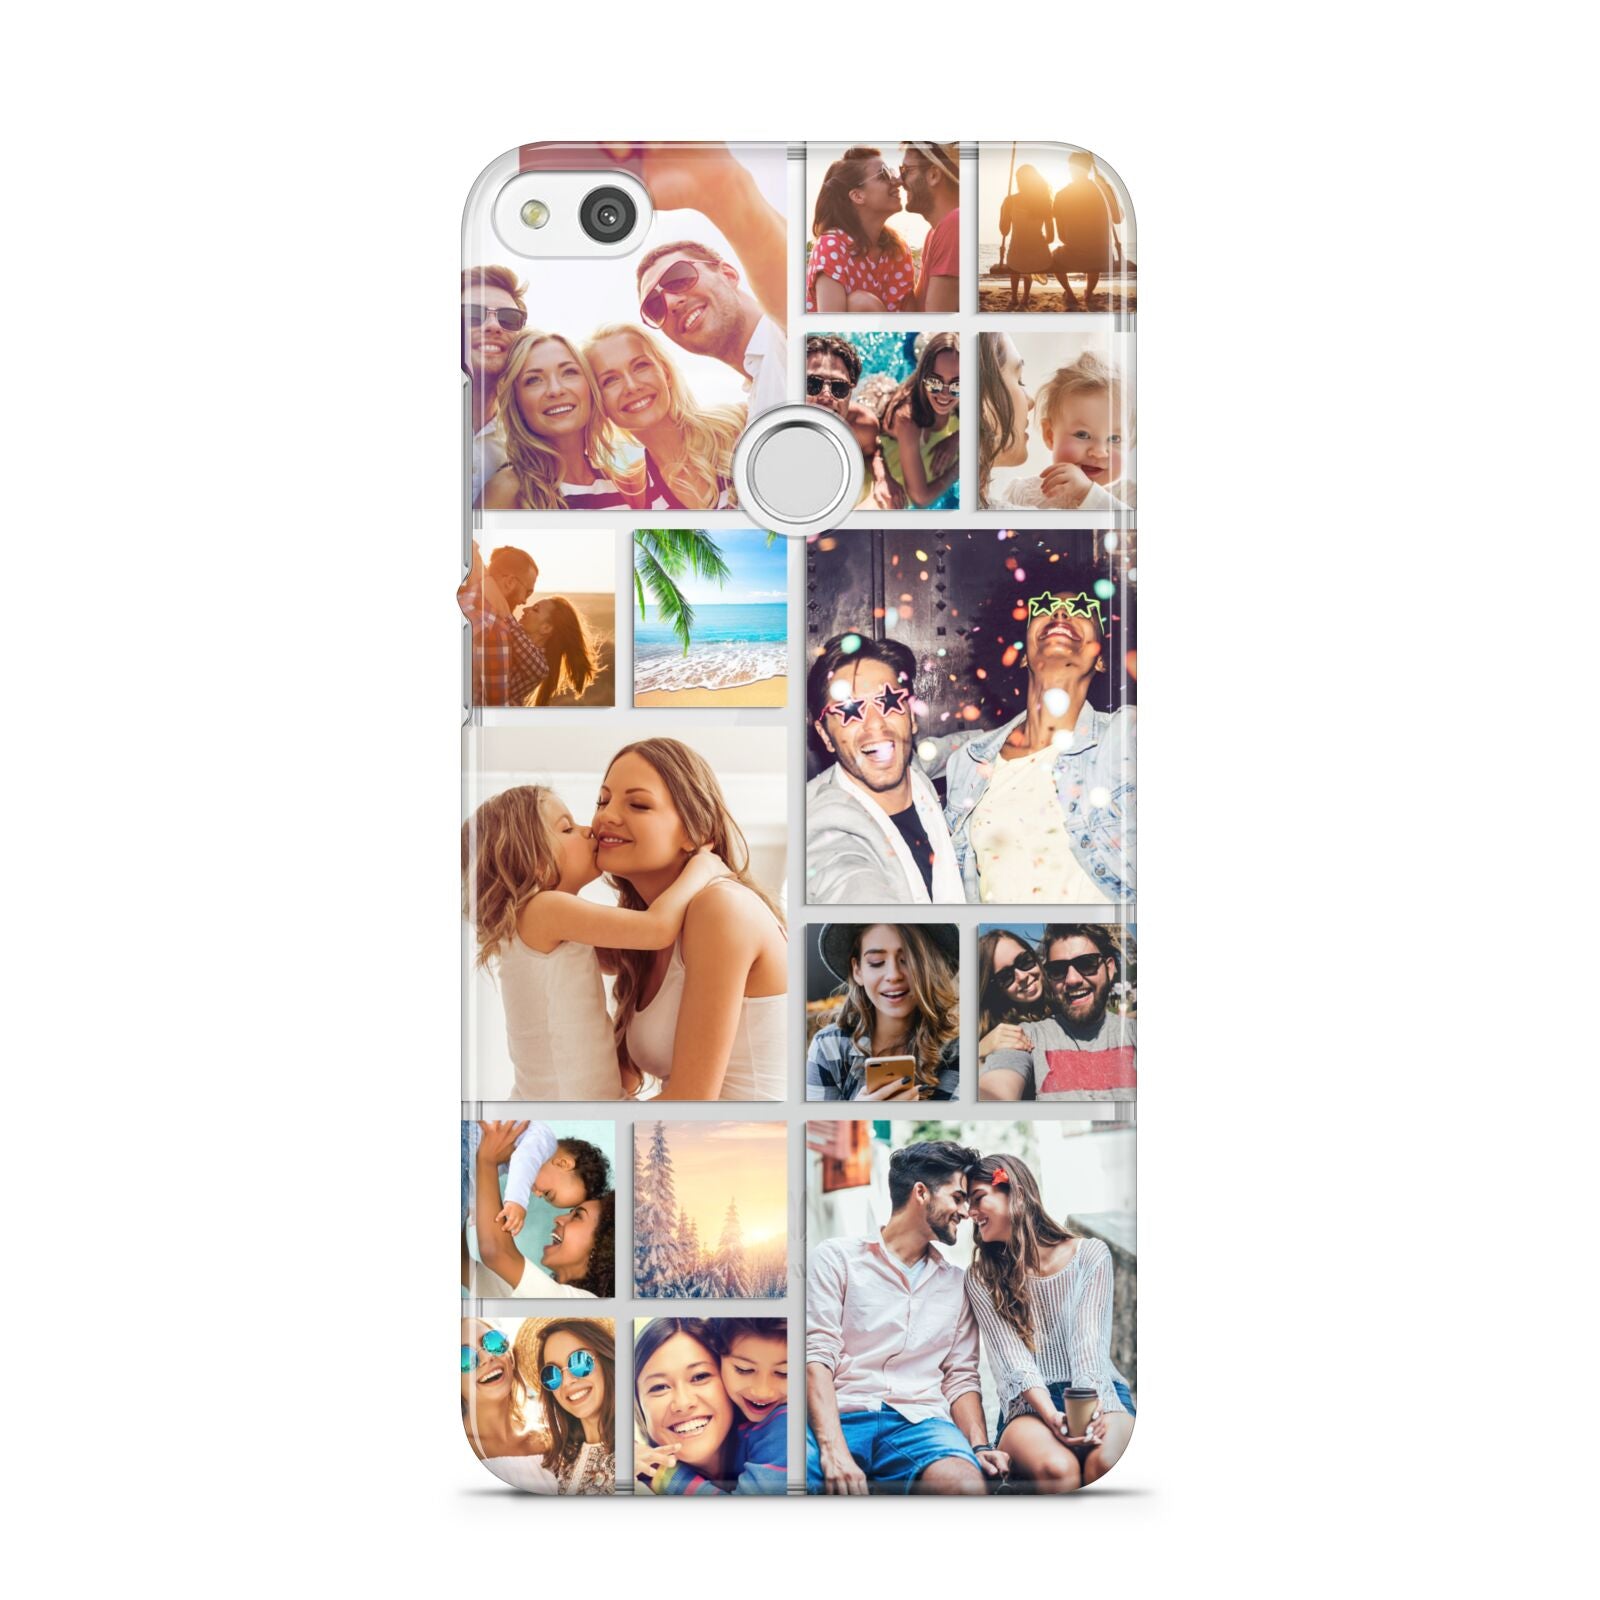 Abstract Multi Tile Photo Montage Upload Huawei P8 Lite Case